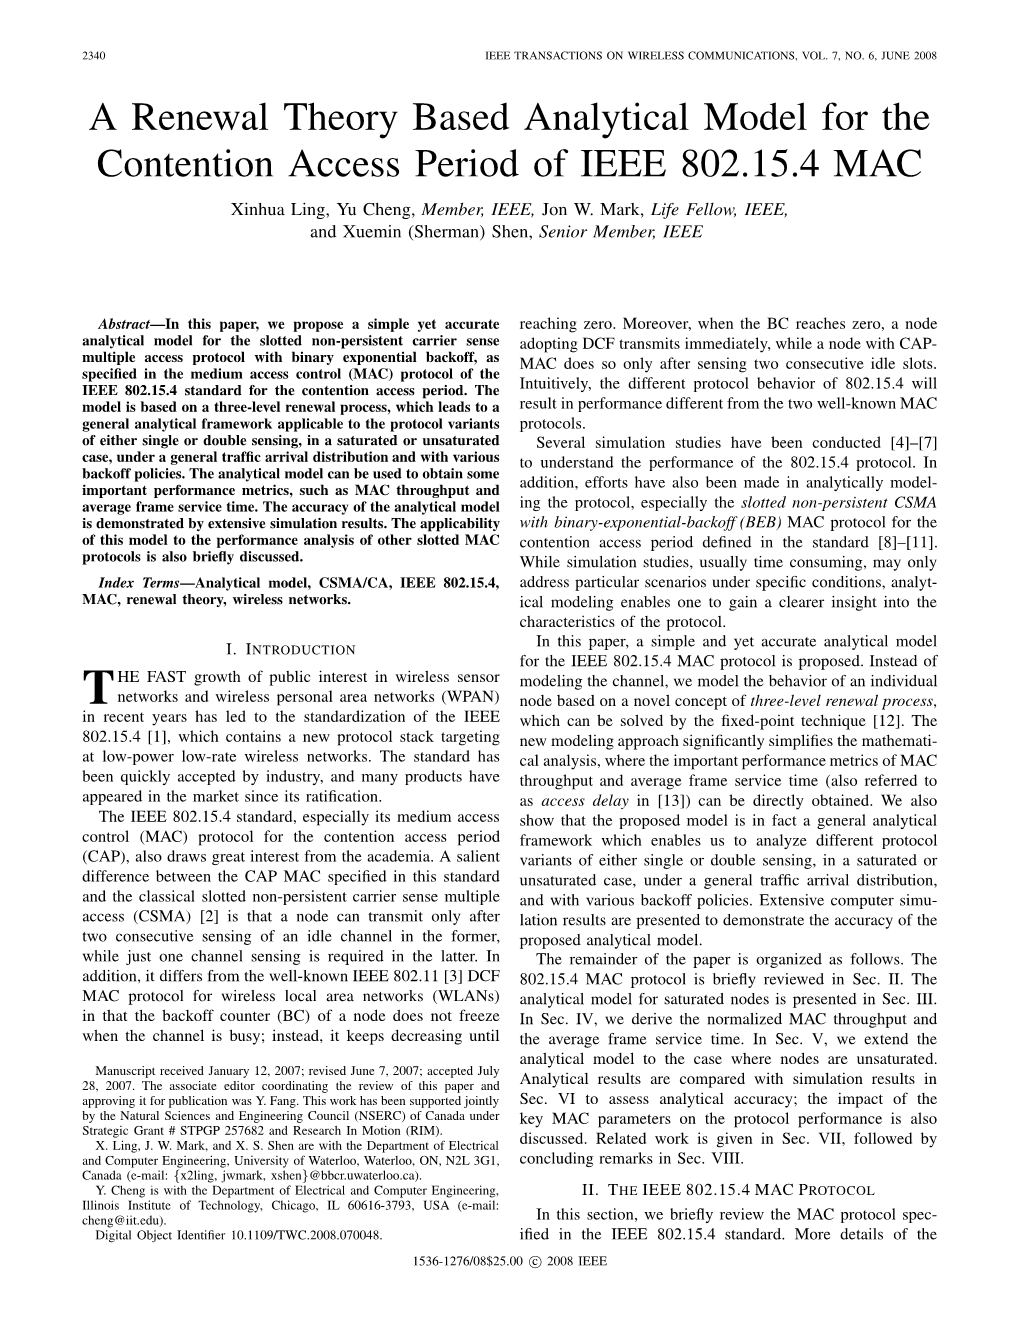 A Renewal Theory Based Analytical Model for the Contention Access Period of IEEE 802.15.4 MAC Xinhua Ling, Yu Cheng, Member, IEEE, Jon W